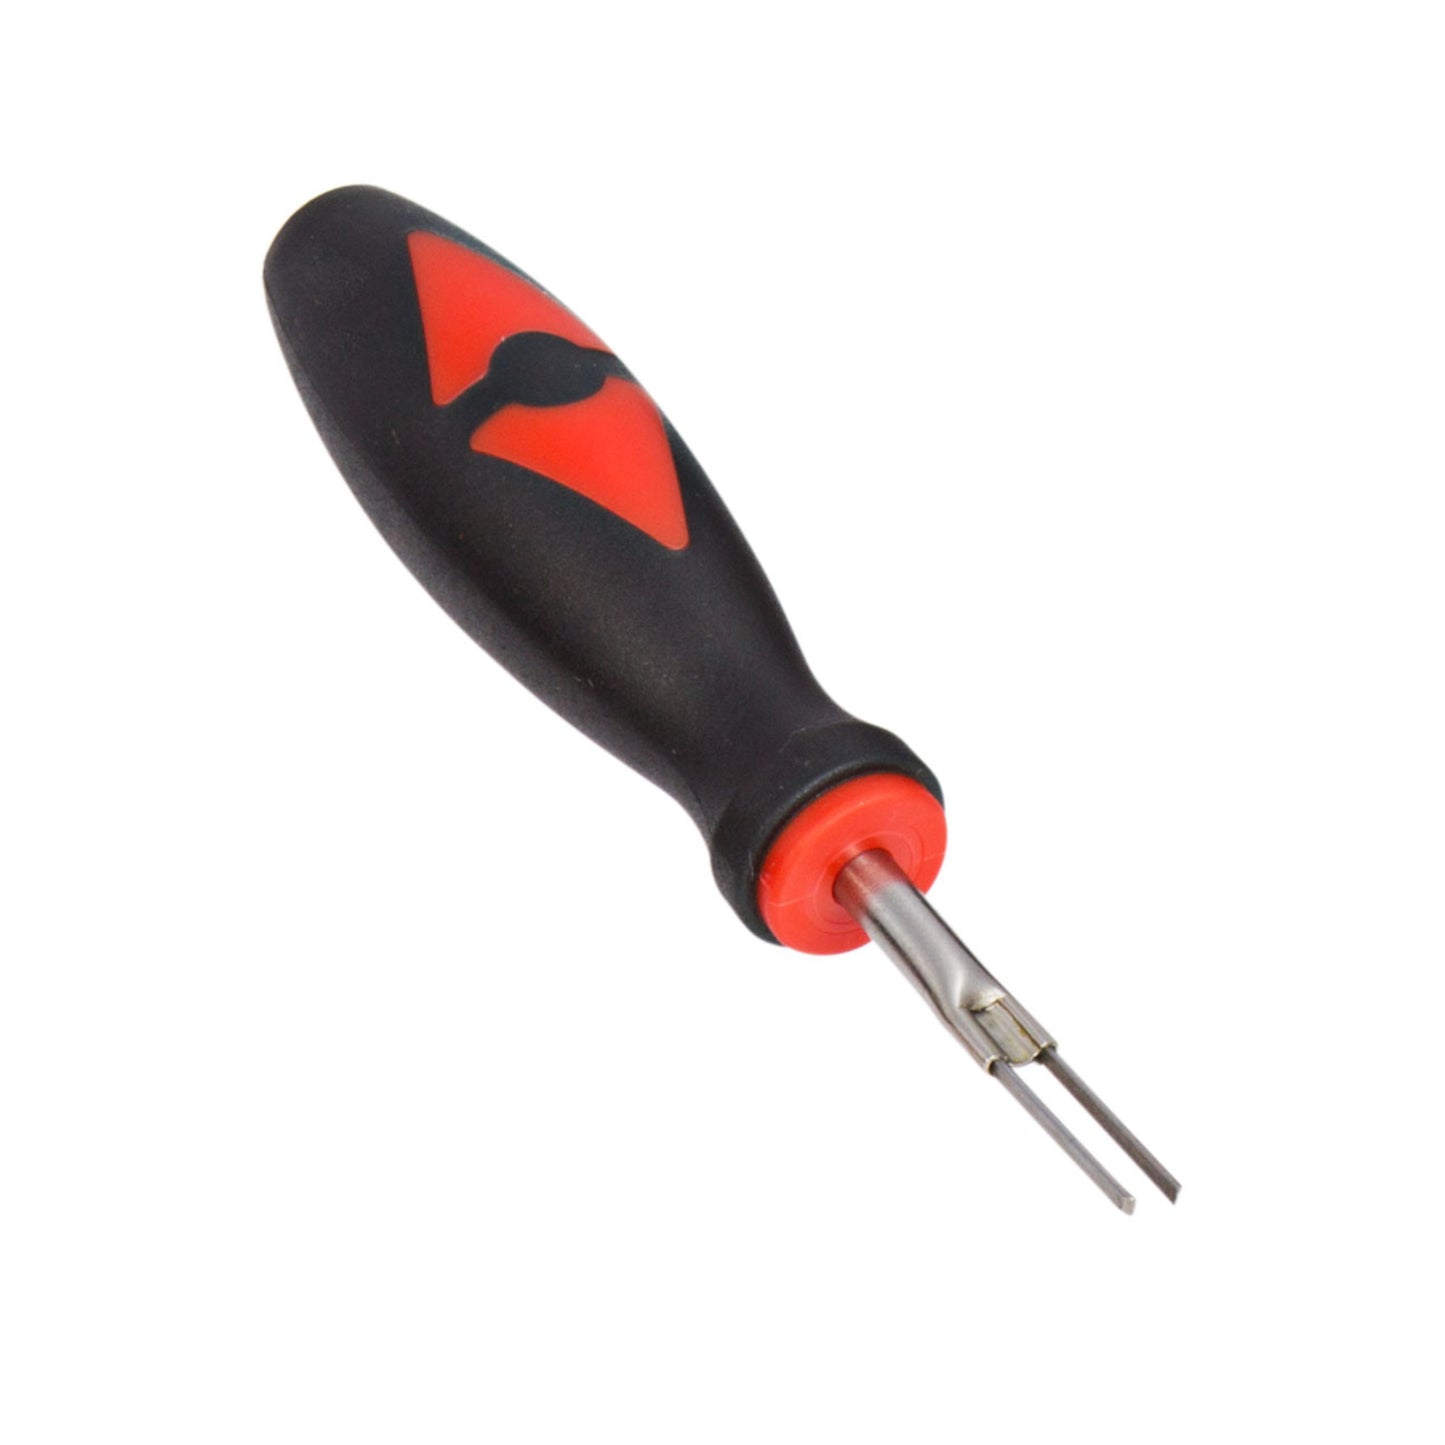 STEELMAN 1.55mm x 17.00mm Flat Twin Blade Automotive Terminal Tool designed to separate wires from their terminal blocks without causing damage to either